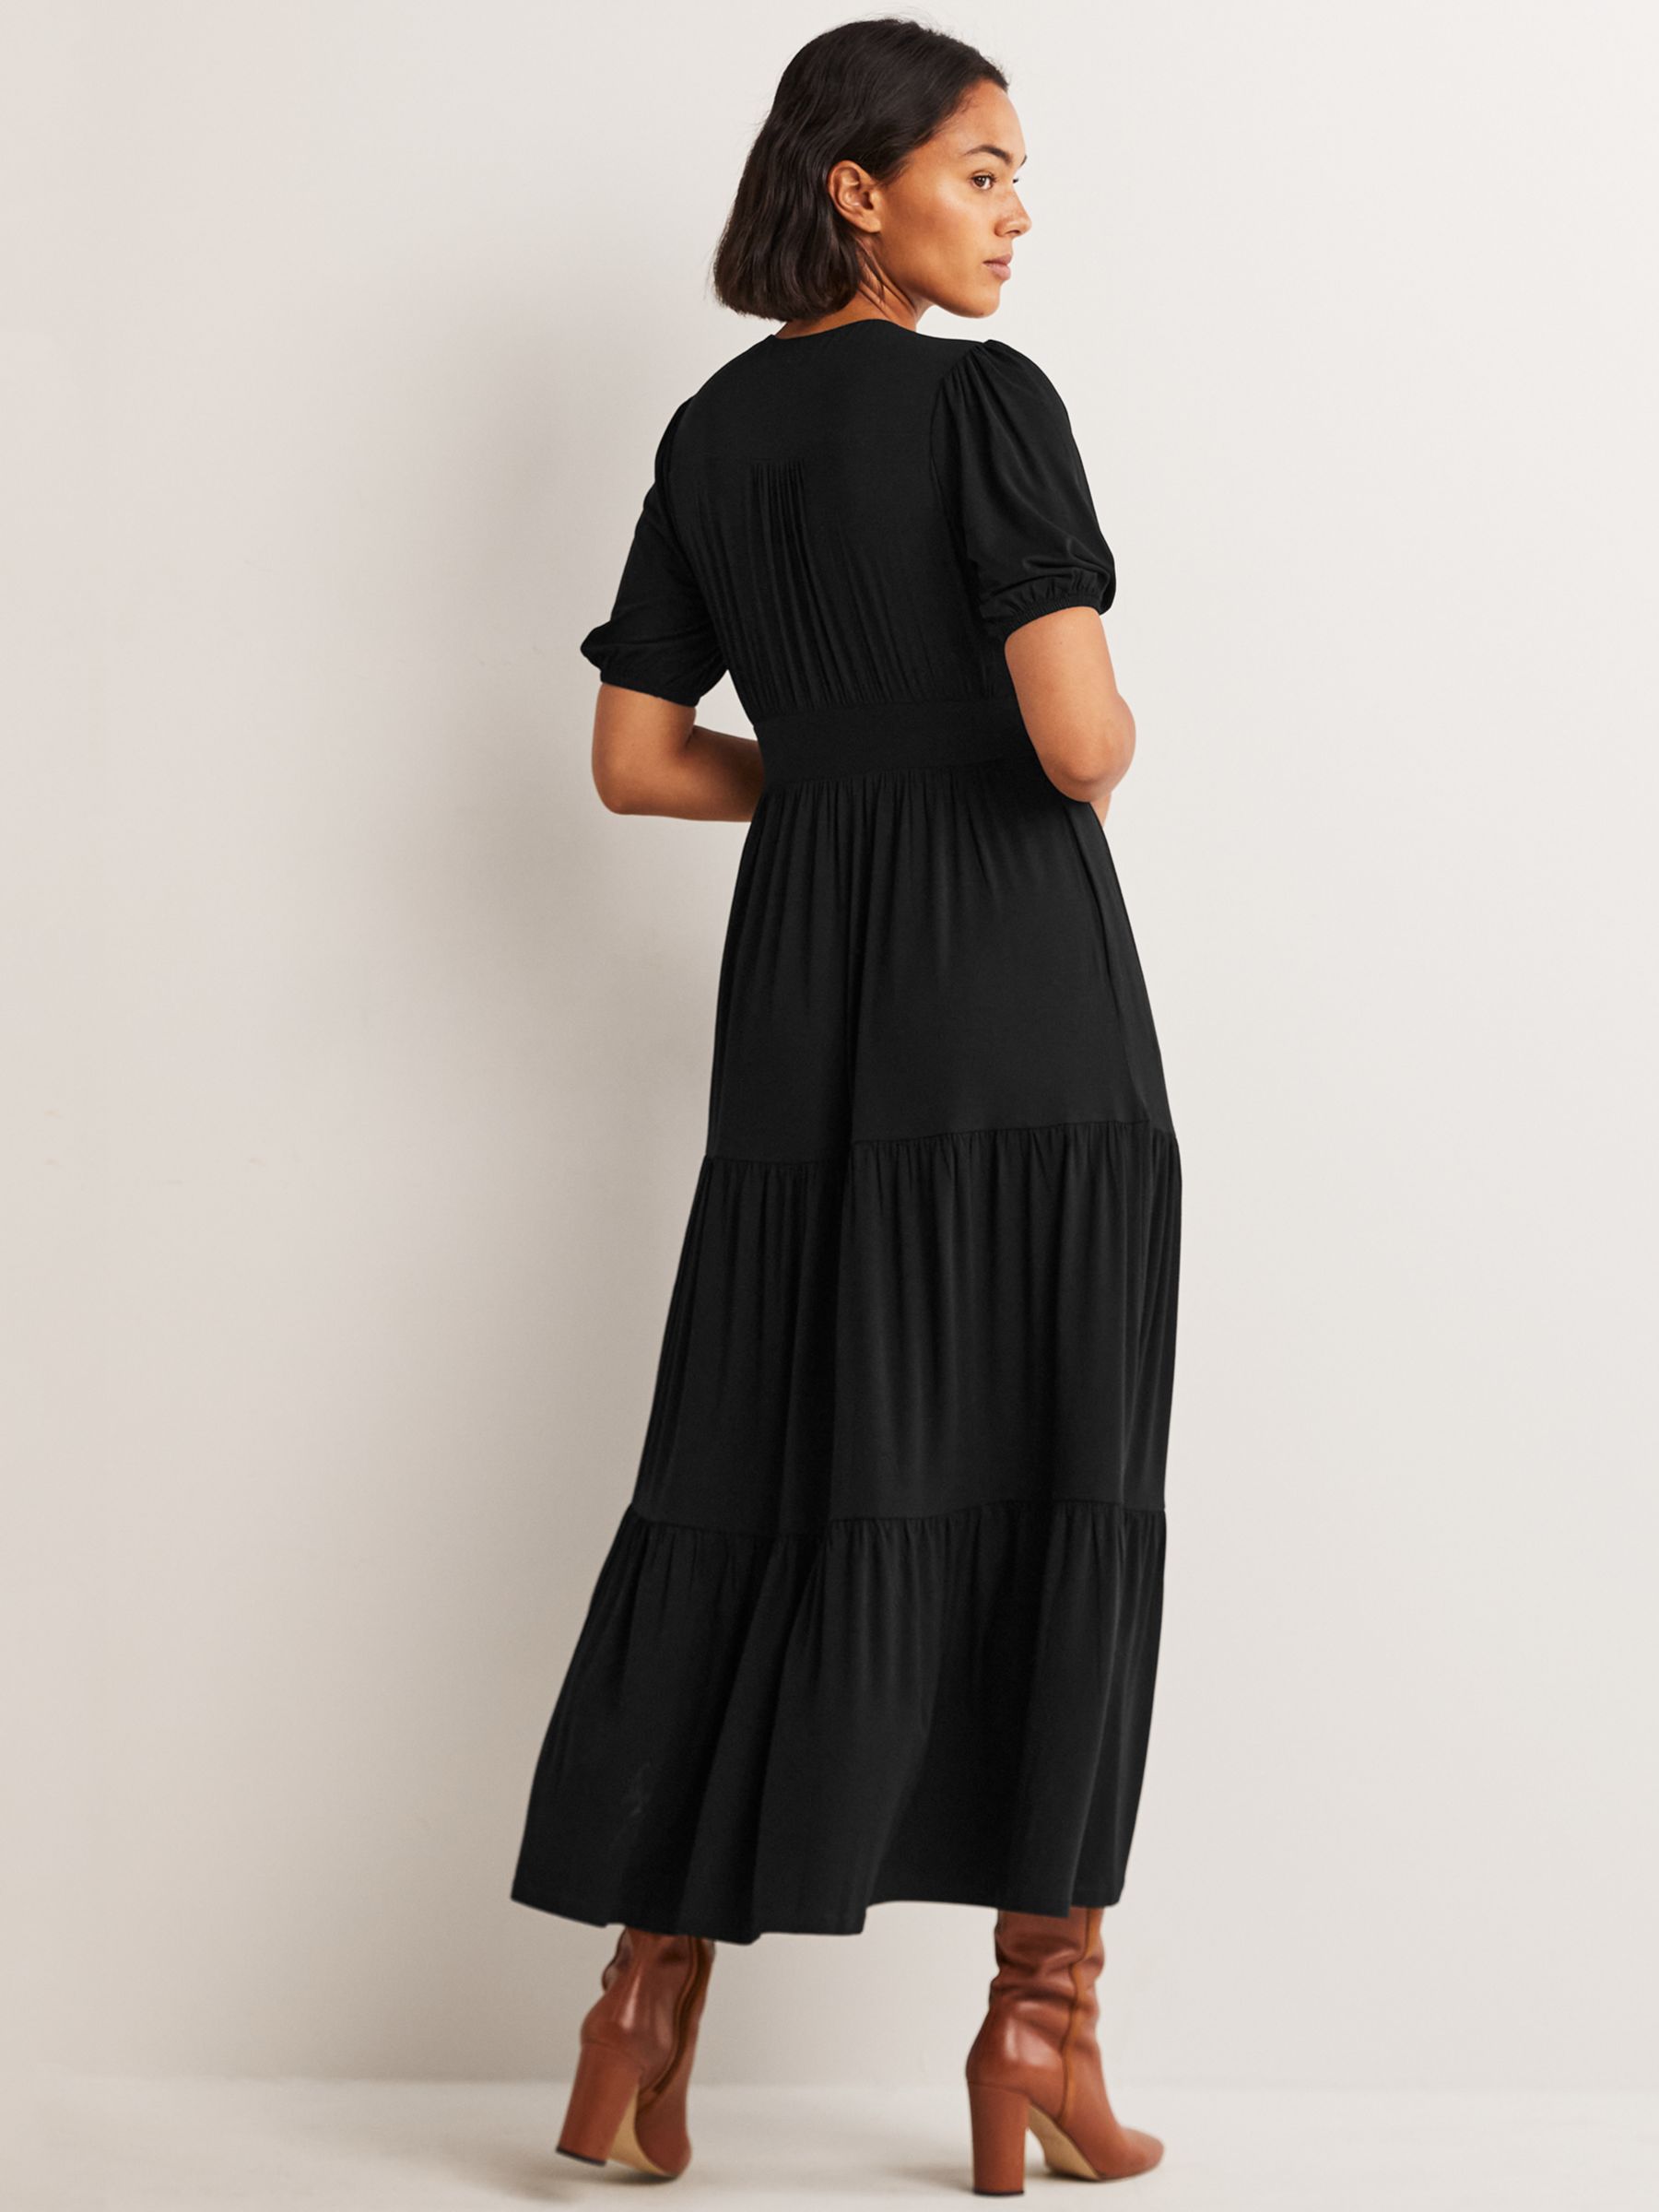 Boden Tiered Midi Jersey Dress, Black at John Lewis & Partners